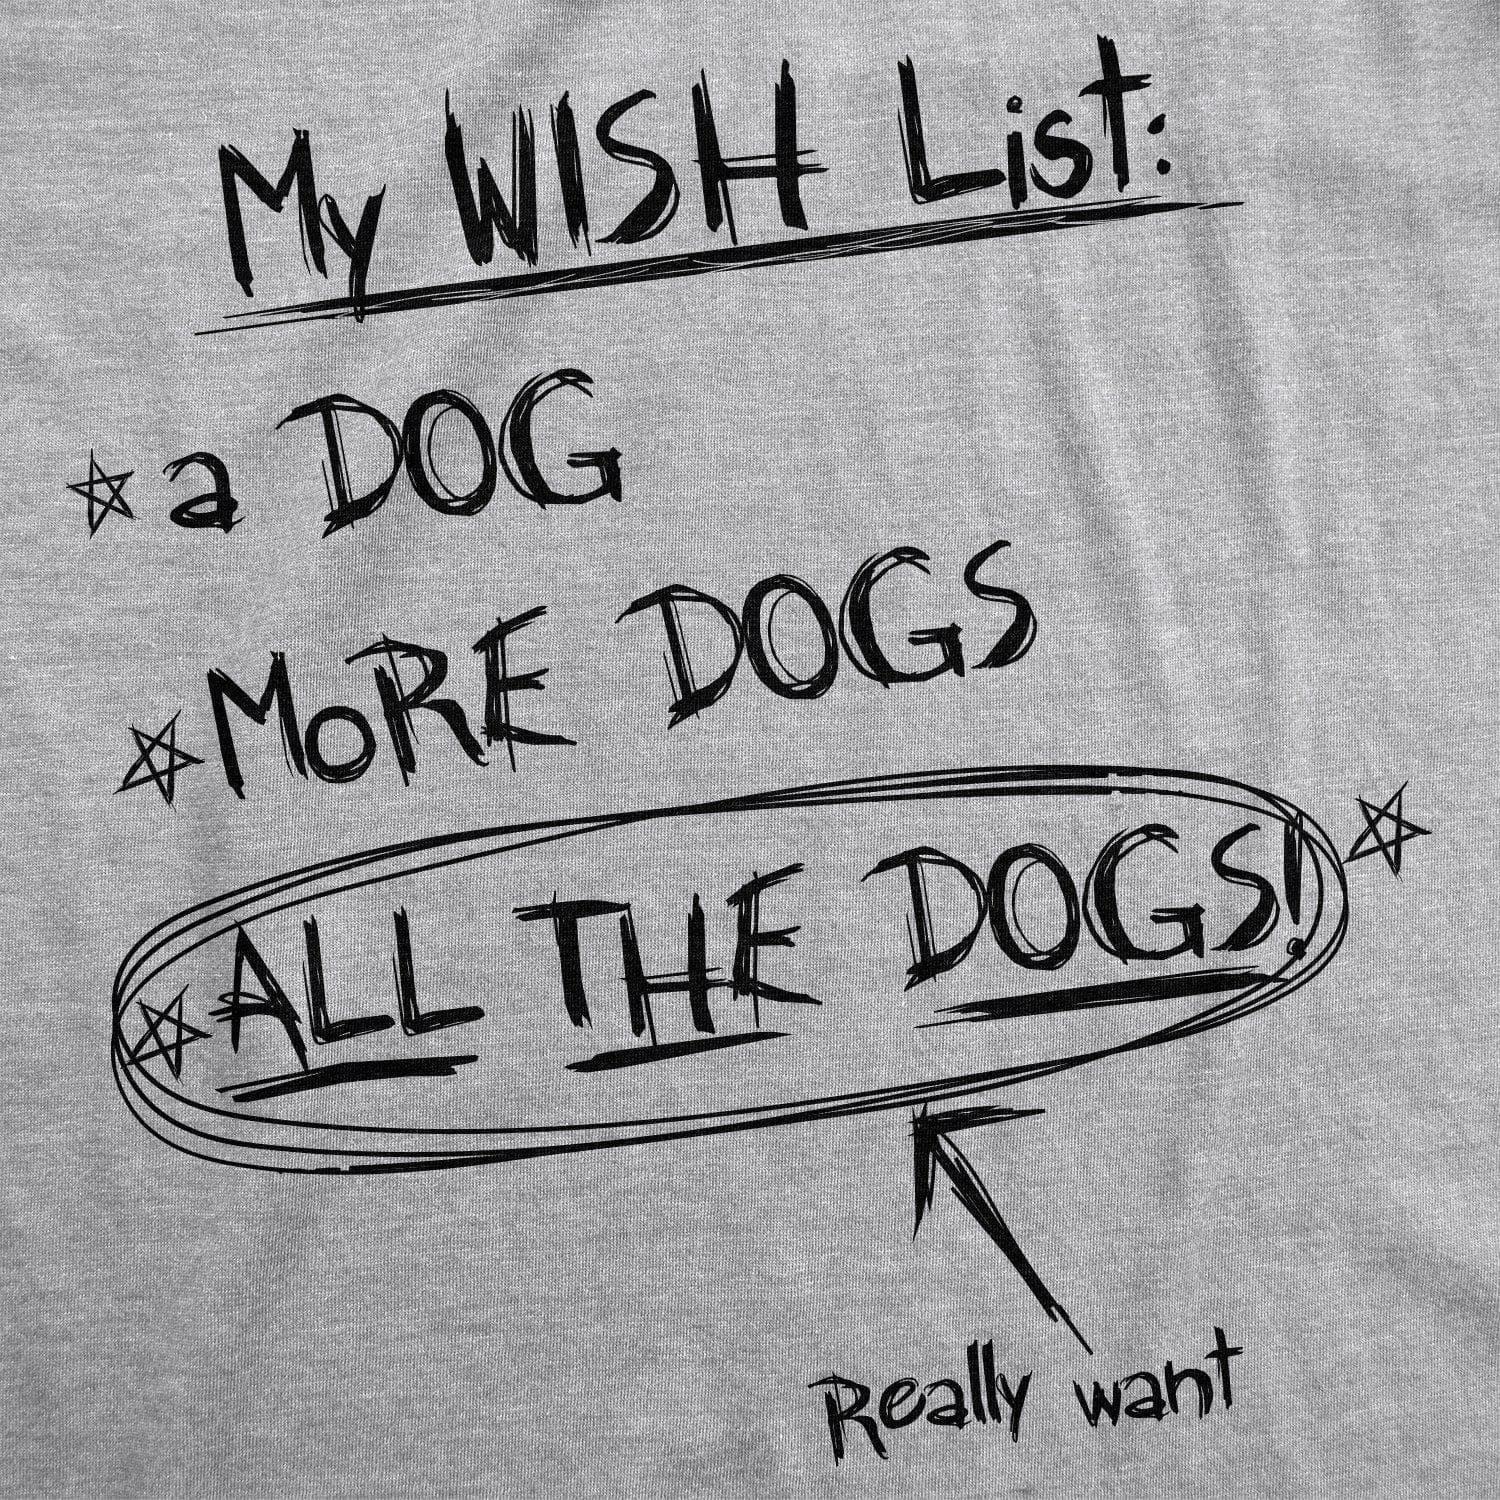 Wish List: All The Dogs Women's Tshirt - Crazy Dog T-Shirts